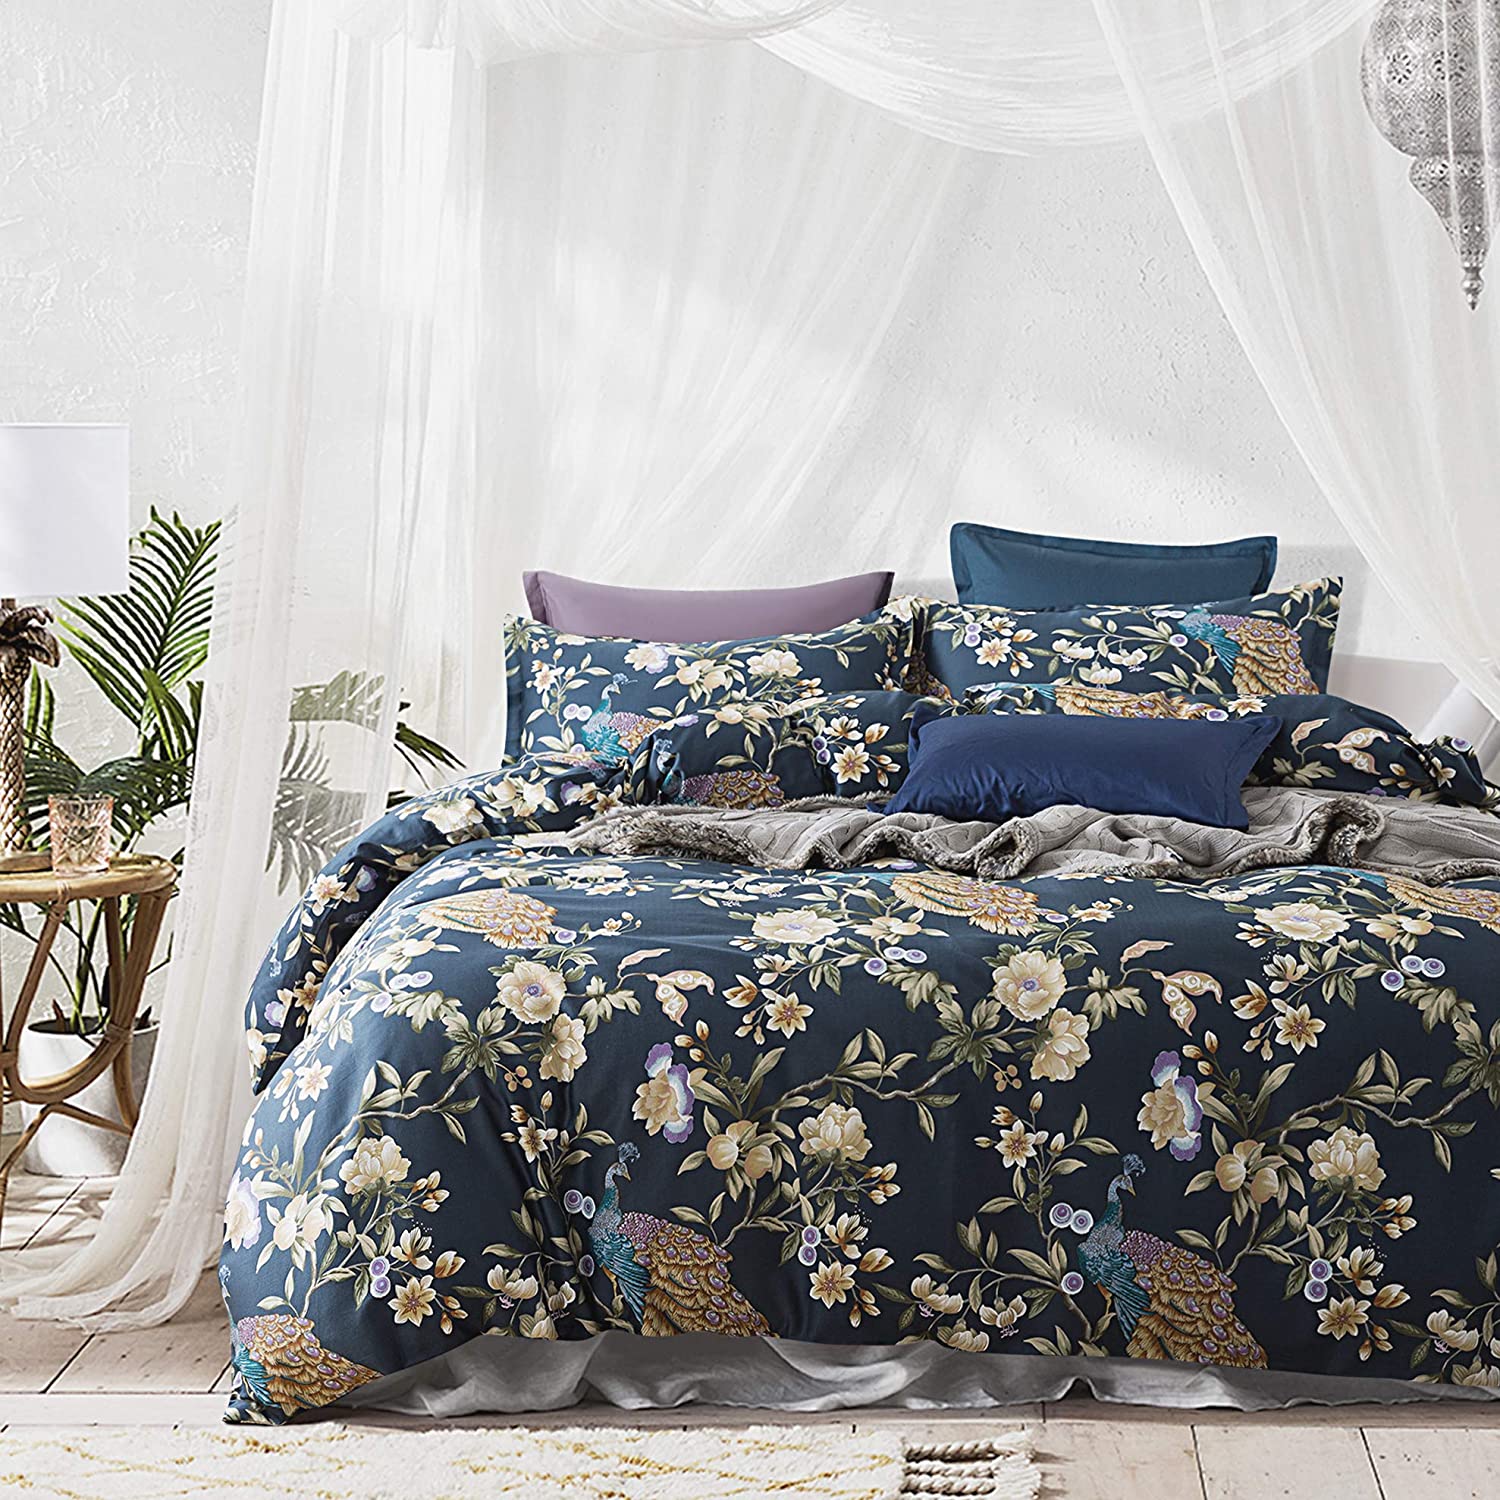 Price:$92.80  Oriental Garden Majestic Peacock Bird Floral Duvet Cover Chinoiserie Chic Asian Style Blooming Trees Vines and Branches Long Staple Cotton 3pc Bedding Set (Orion Blue, Queen) : Home & Kitchen